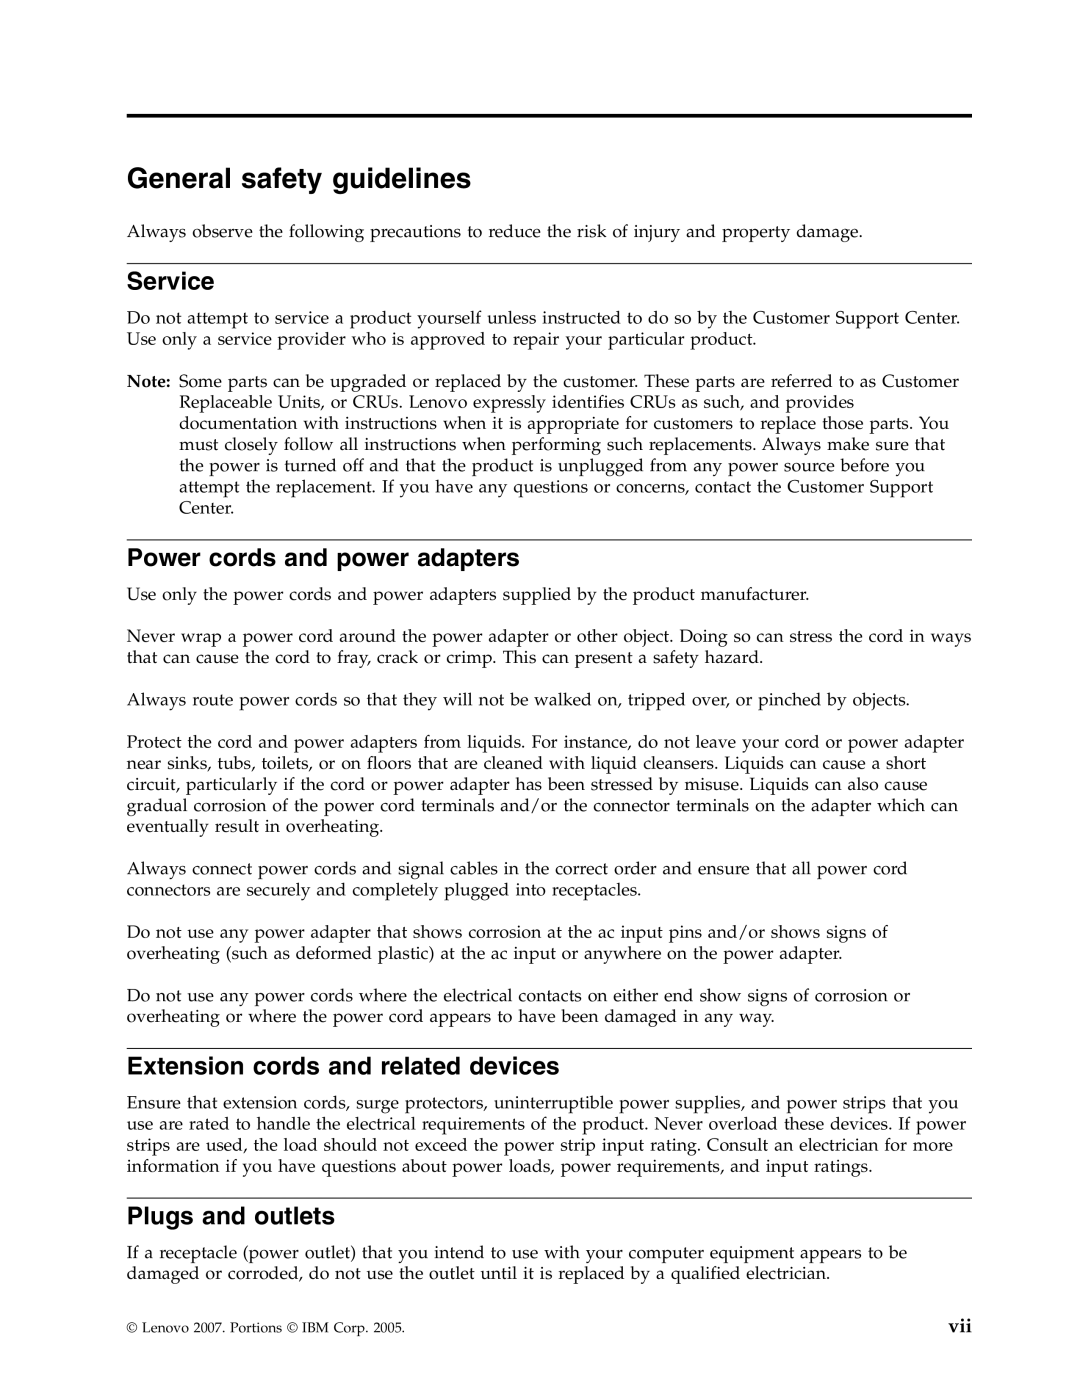 Lenovo 43N3201 General safety guidelines, Service, Power cords and power adapters, Extension cords and related devices 